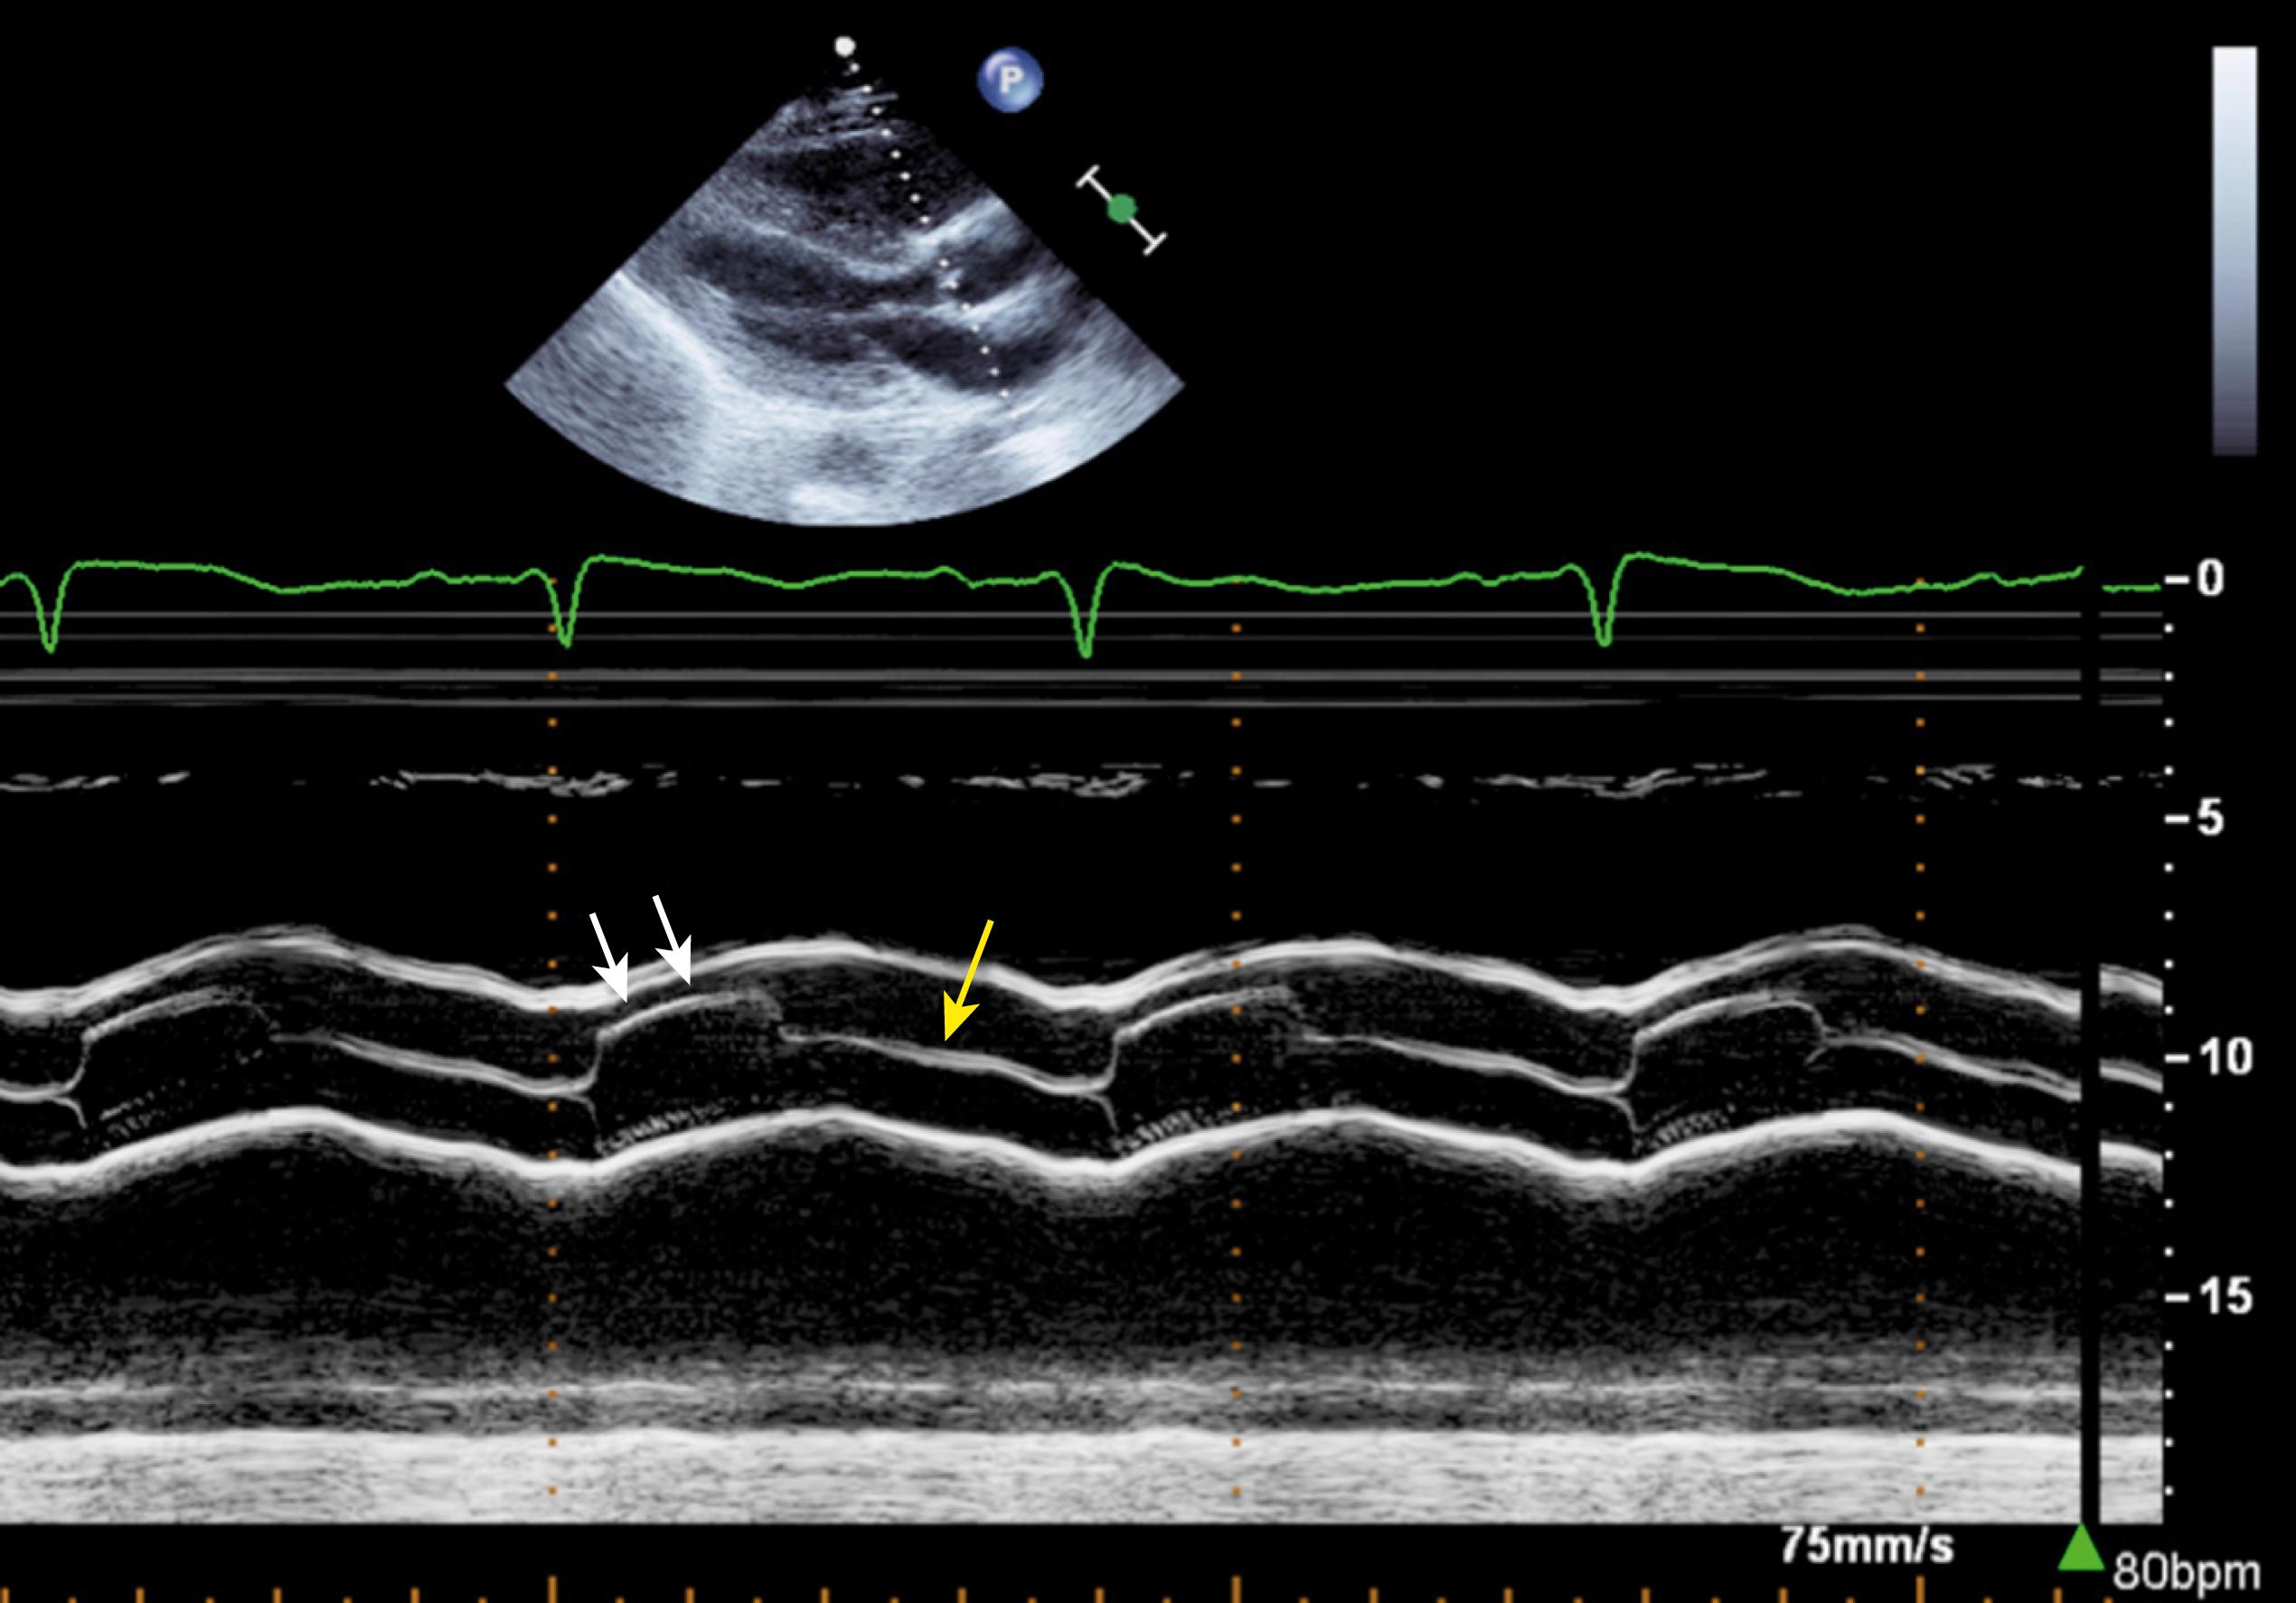 Figure 79.3, M-mode echocardiogram of an aortic valve illustrating the rapid opening slope of the aortic leaflets at the onset of systole, the leaflets aligned parallel to the aortic walls throughout systole (white arrows) , and the central closure line in diastole (yellow arrow) .